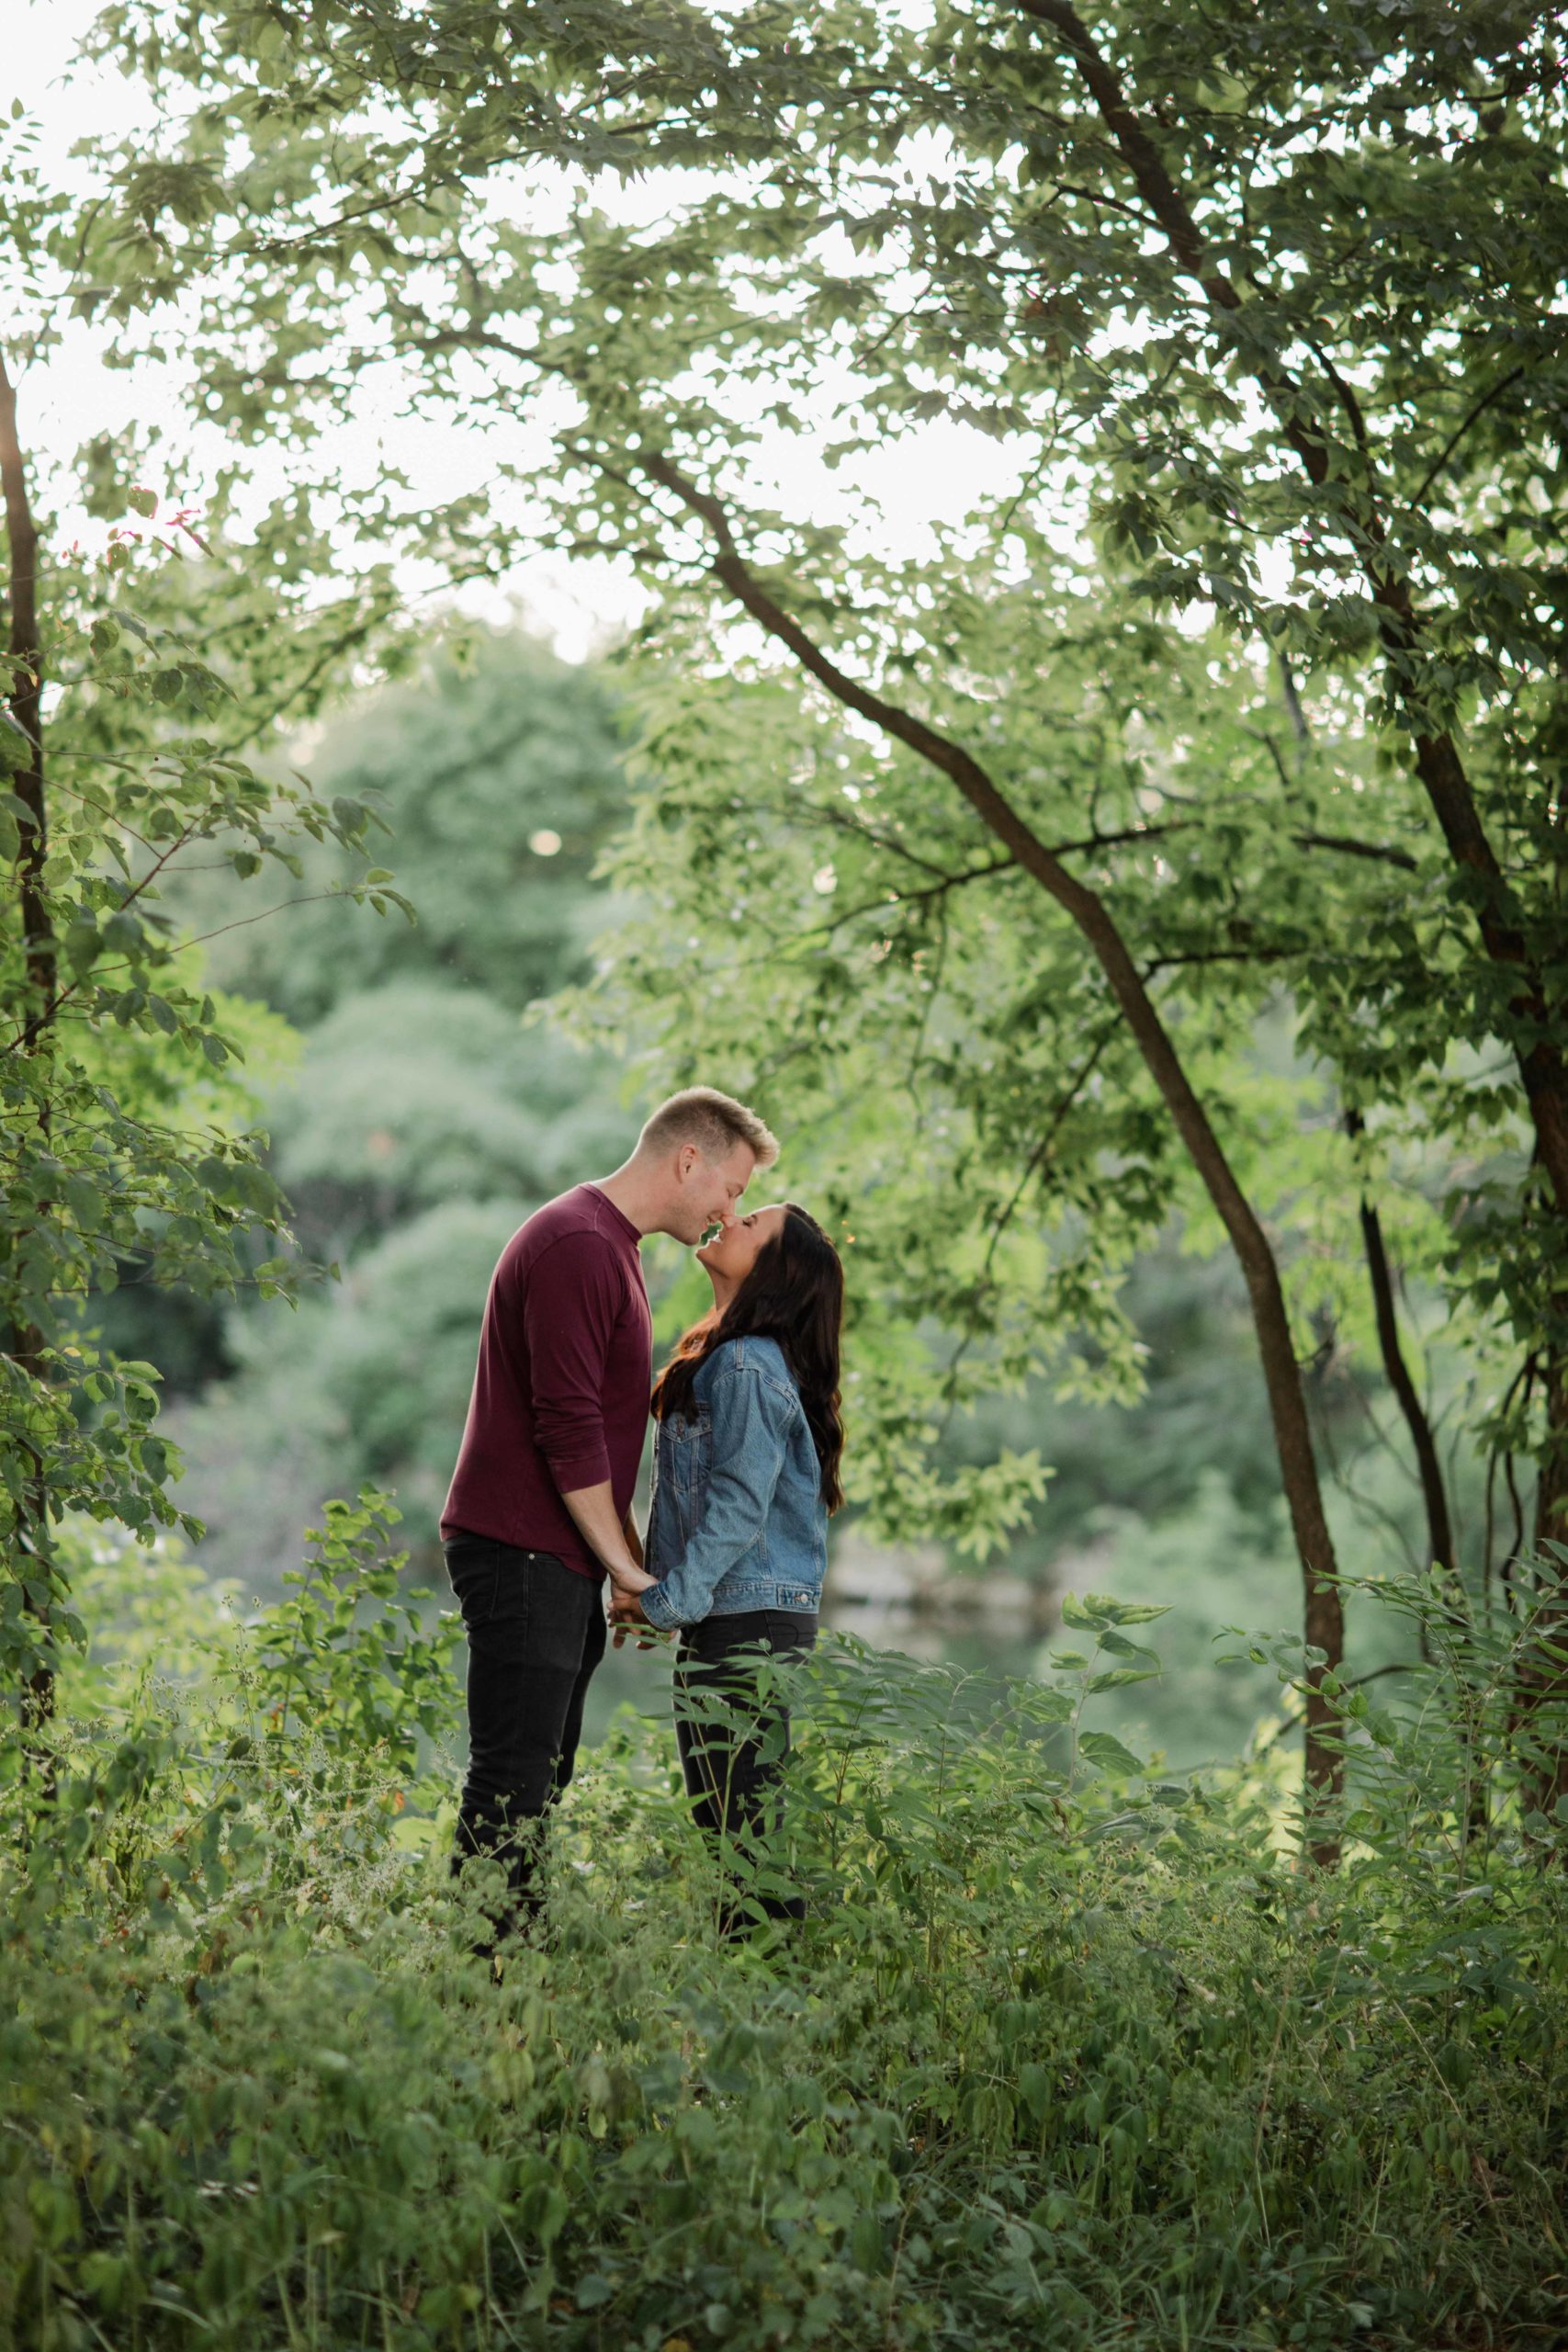 Naperville Riverwalk Engagement Photo Session by Illinois Photographer